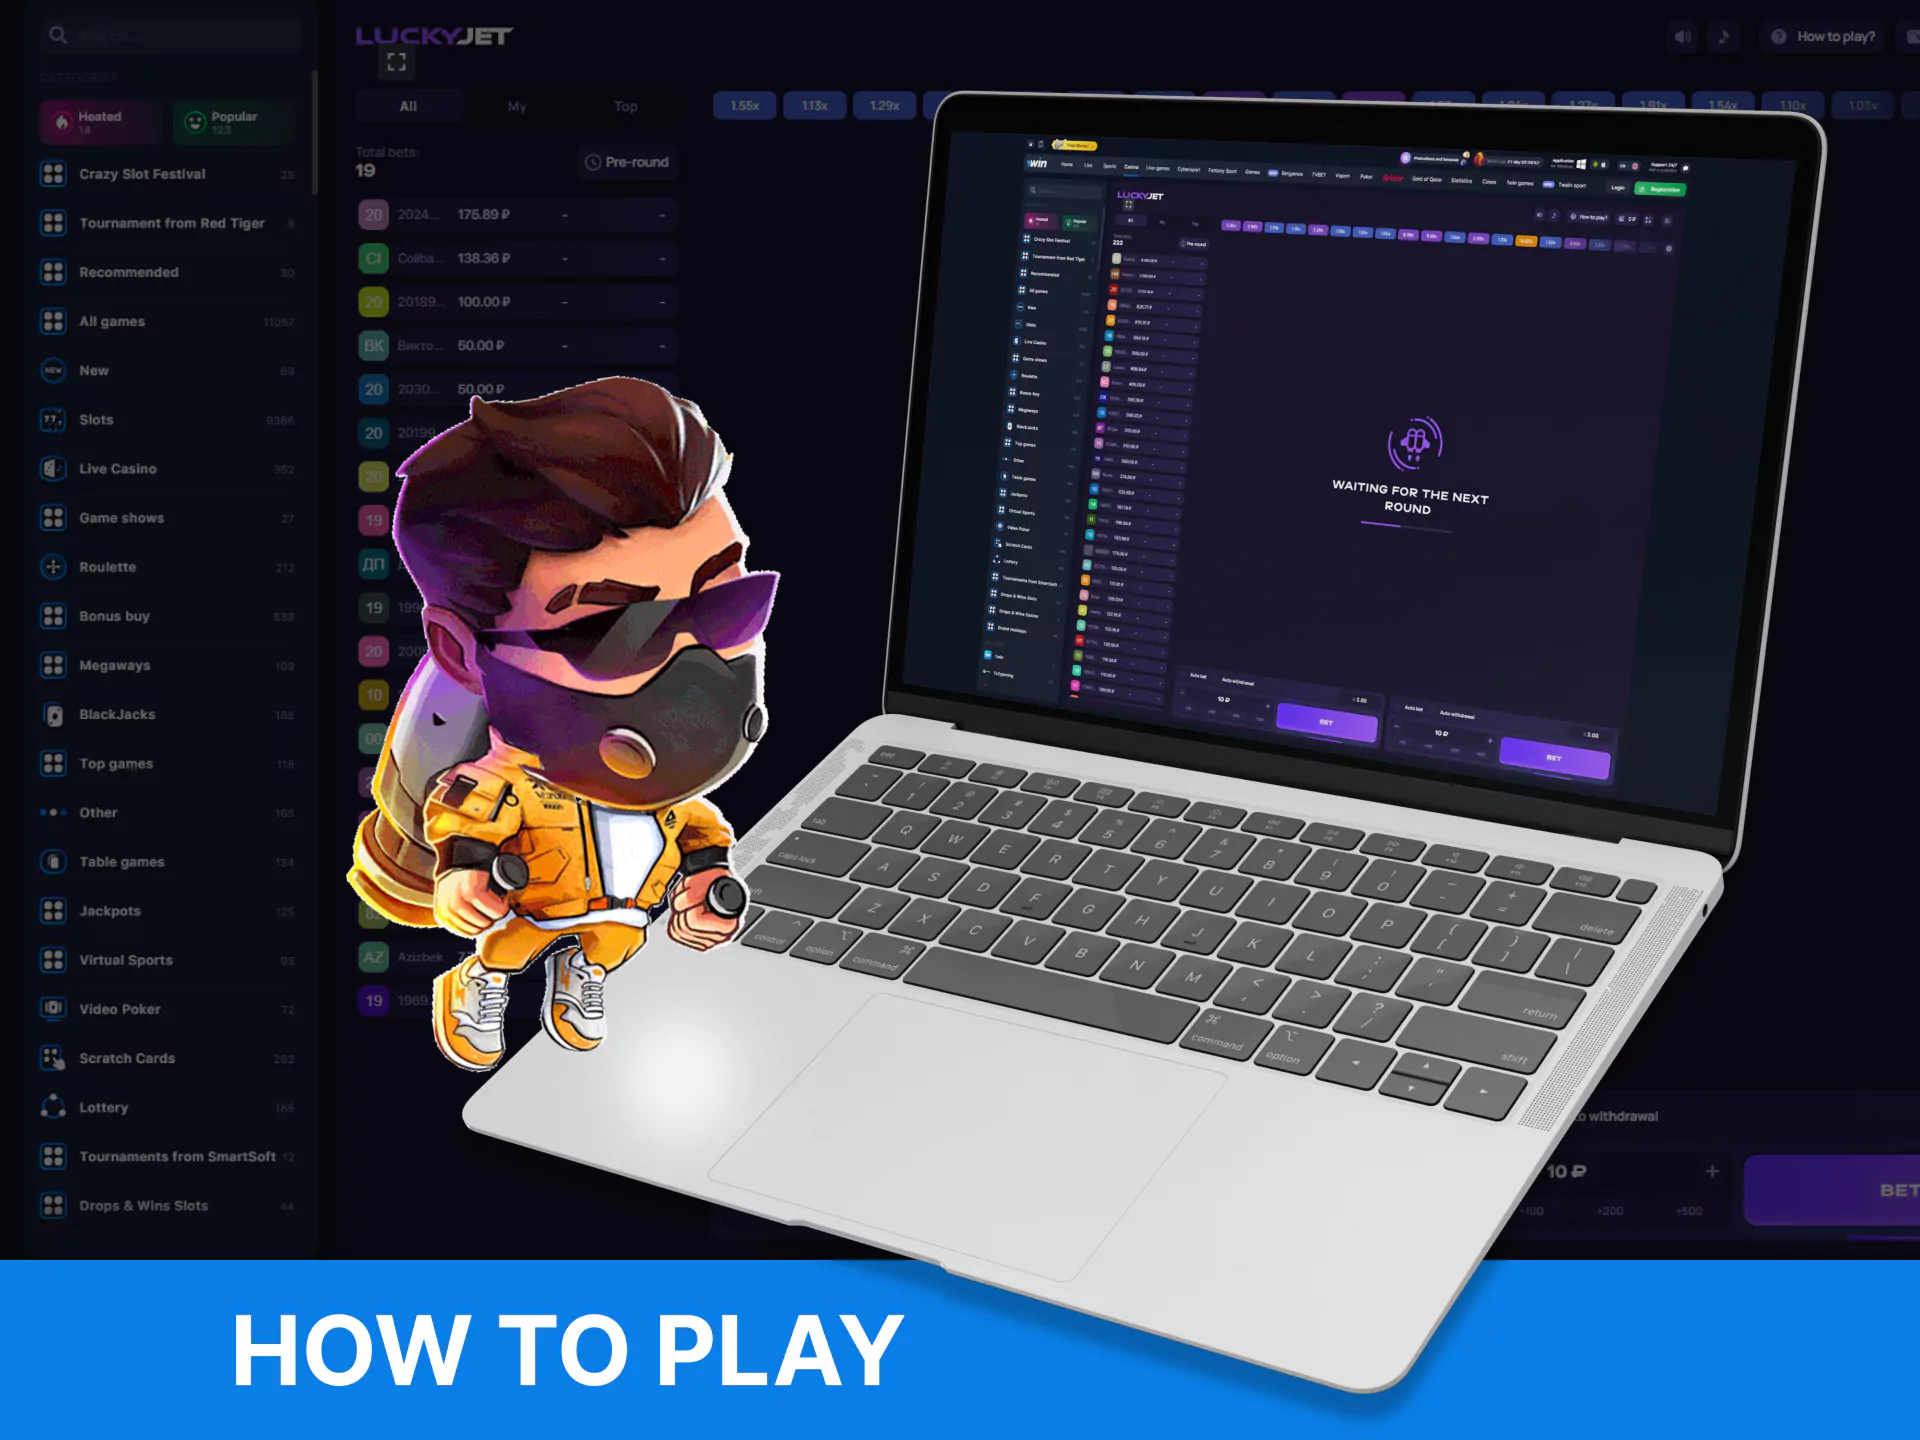 With these instructions you will learn how to play Lucky Jet on the site 1win.